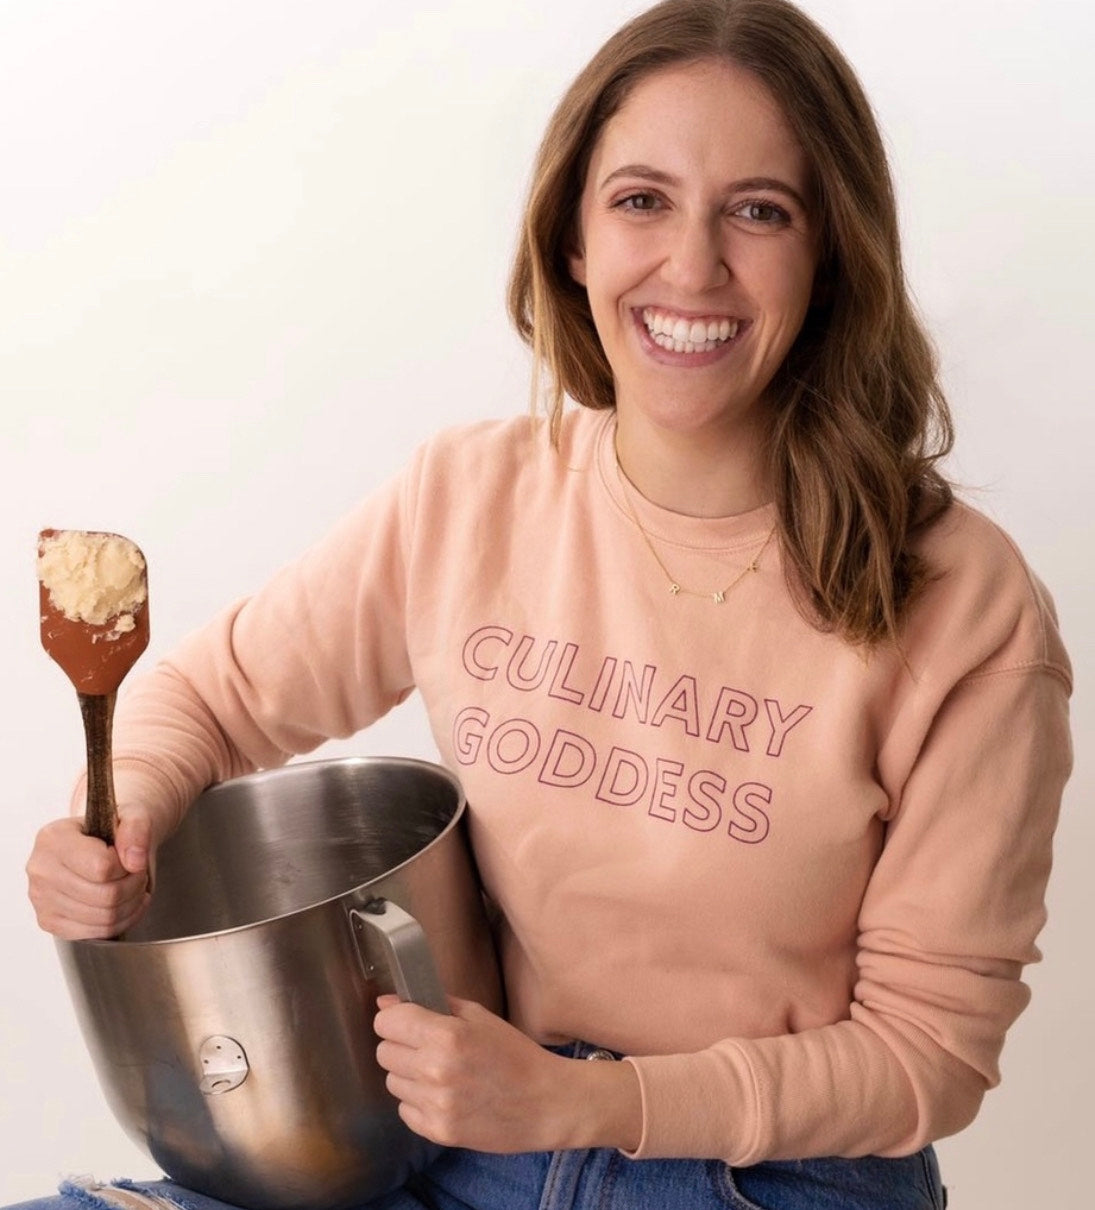 A woman in a pink Culinary Goddess sweatshirt smiling and holding a mixing bowl and spatula